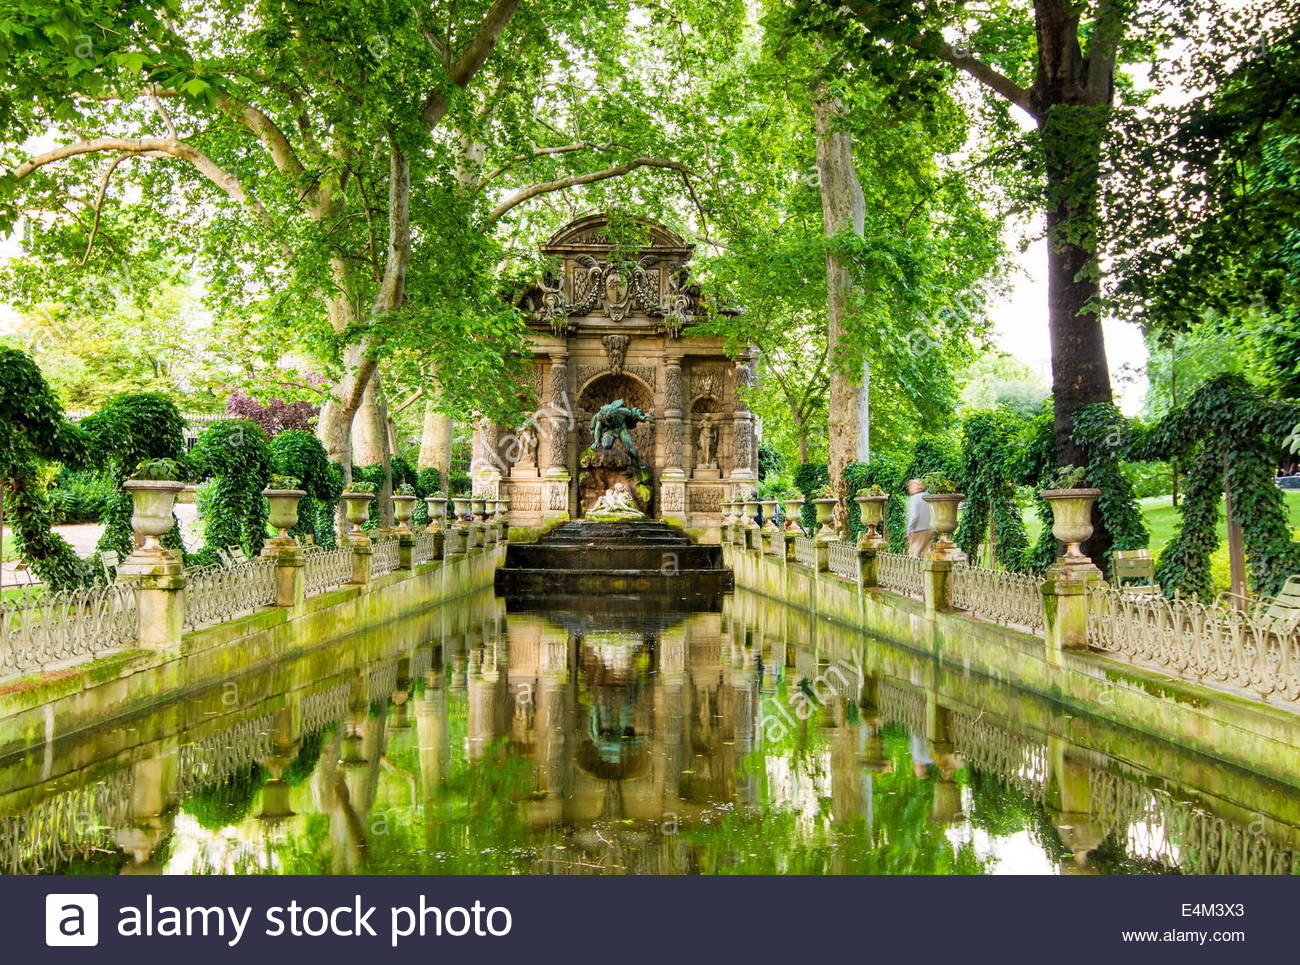 the medici fountain is a monumental fountain in the jardin du luxembourg E4M3X3